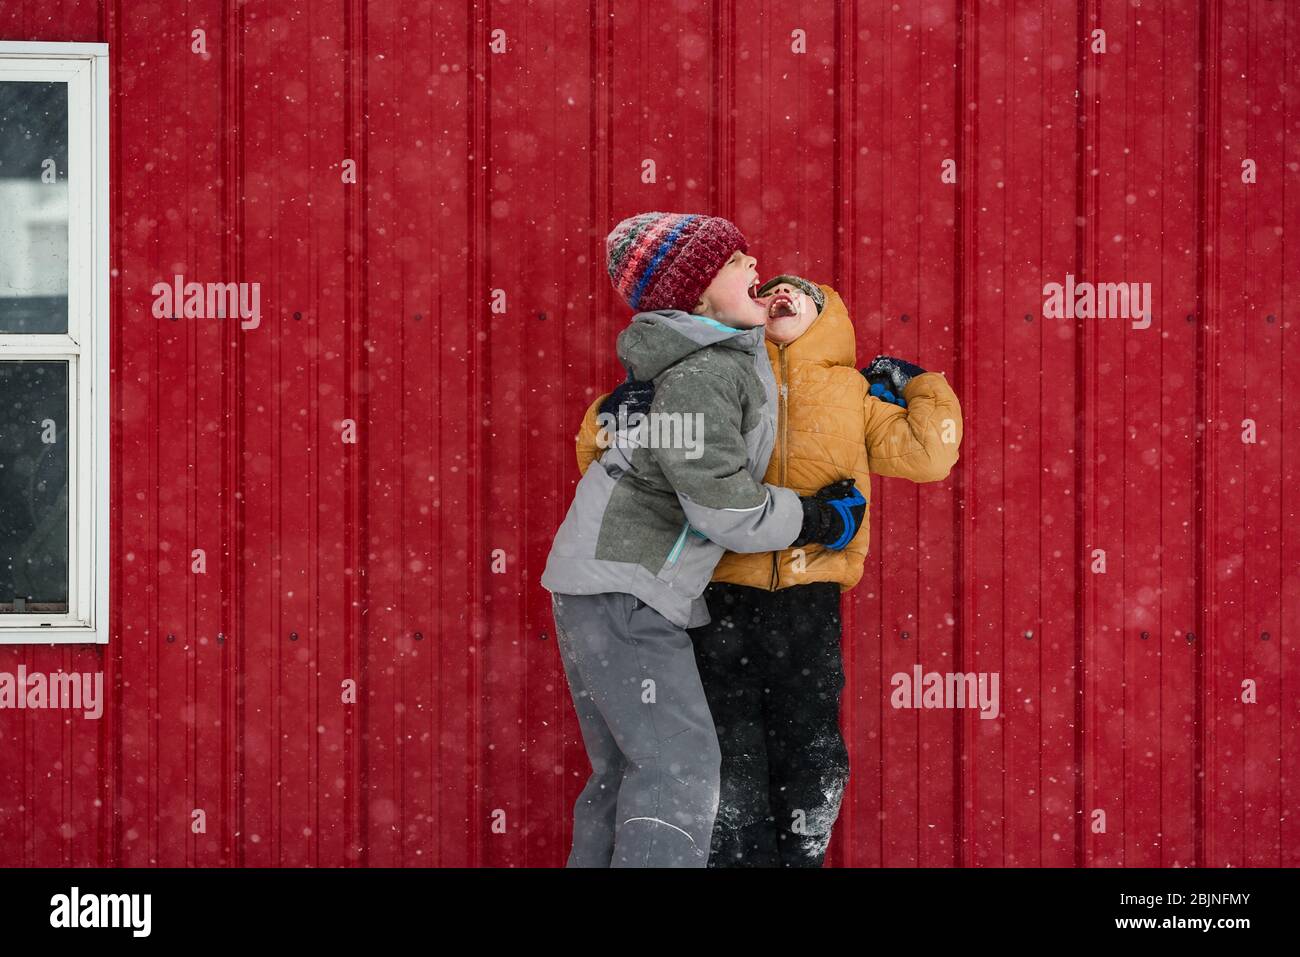 Two children catching snowflakes in the mouths, USA Stock Photo